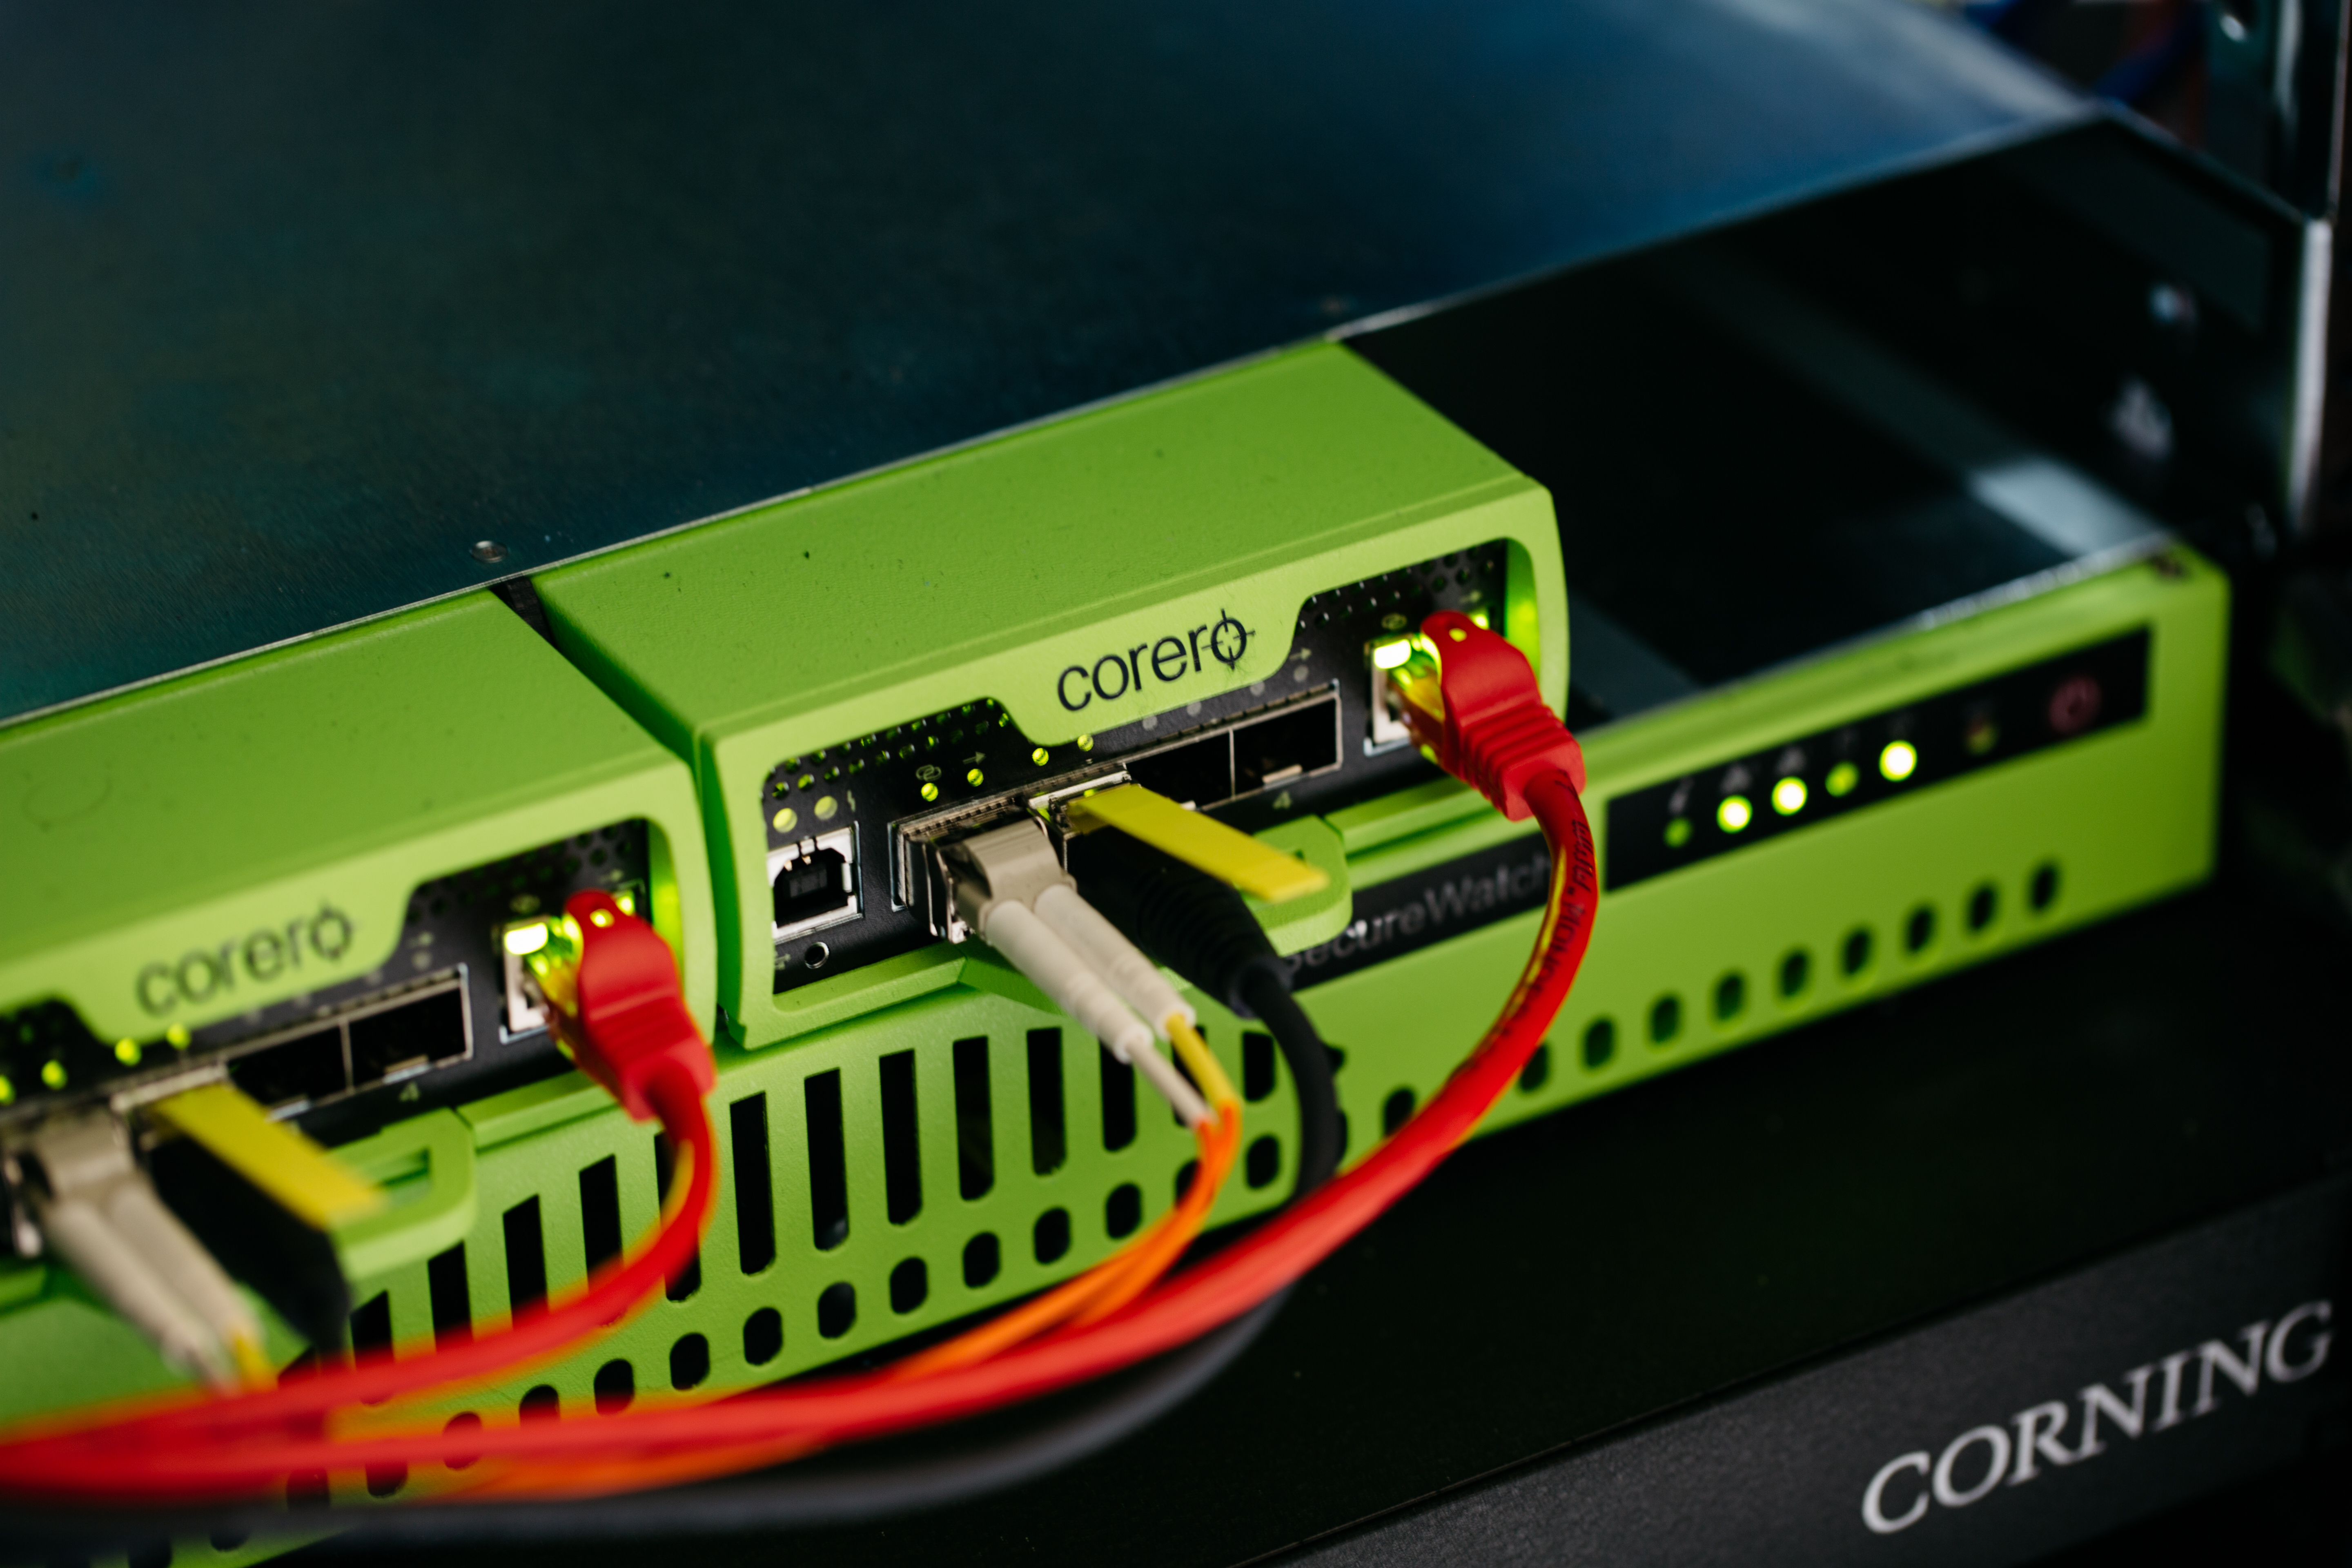 Ethernet cords running into the back of a Corero firewall